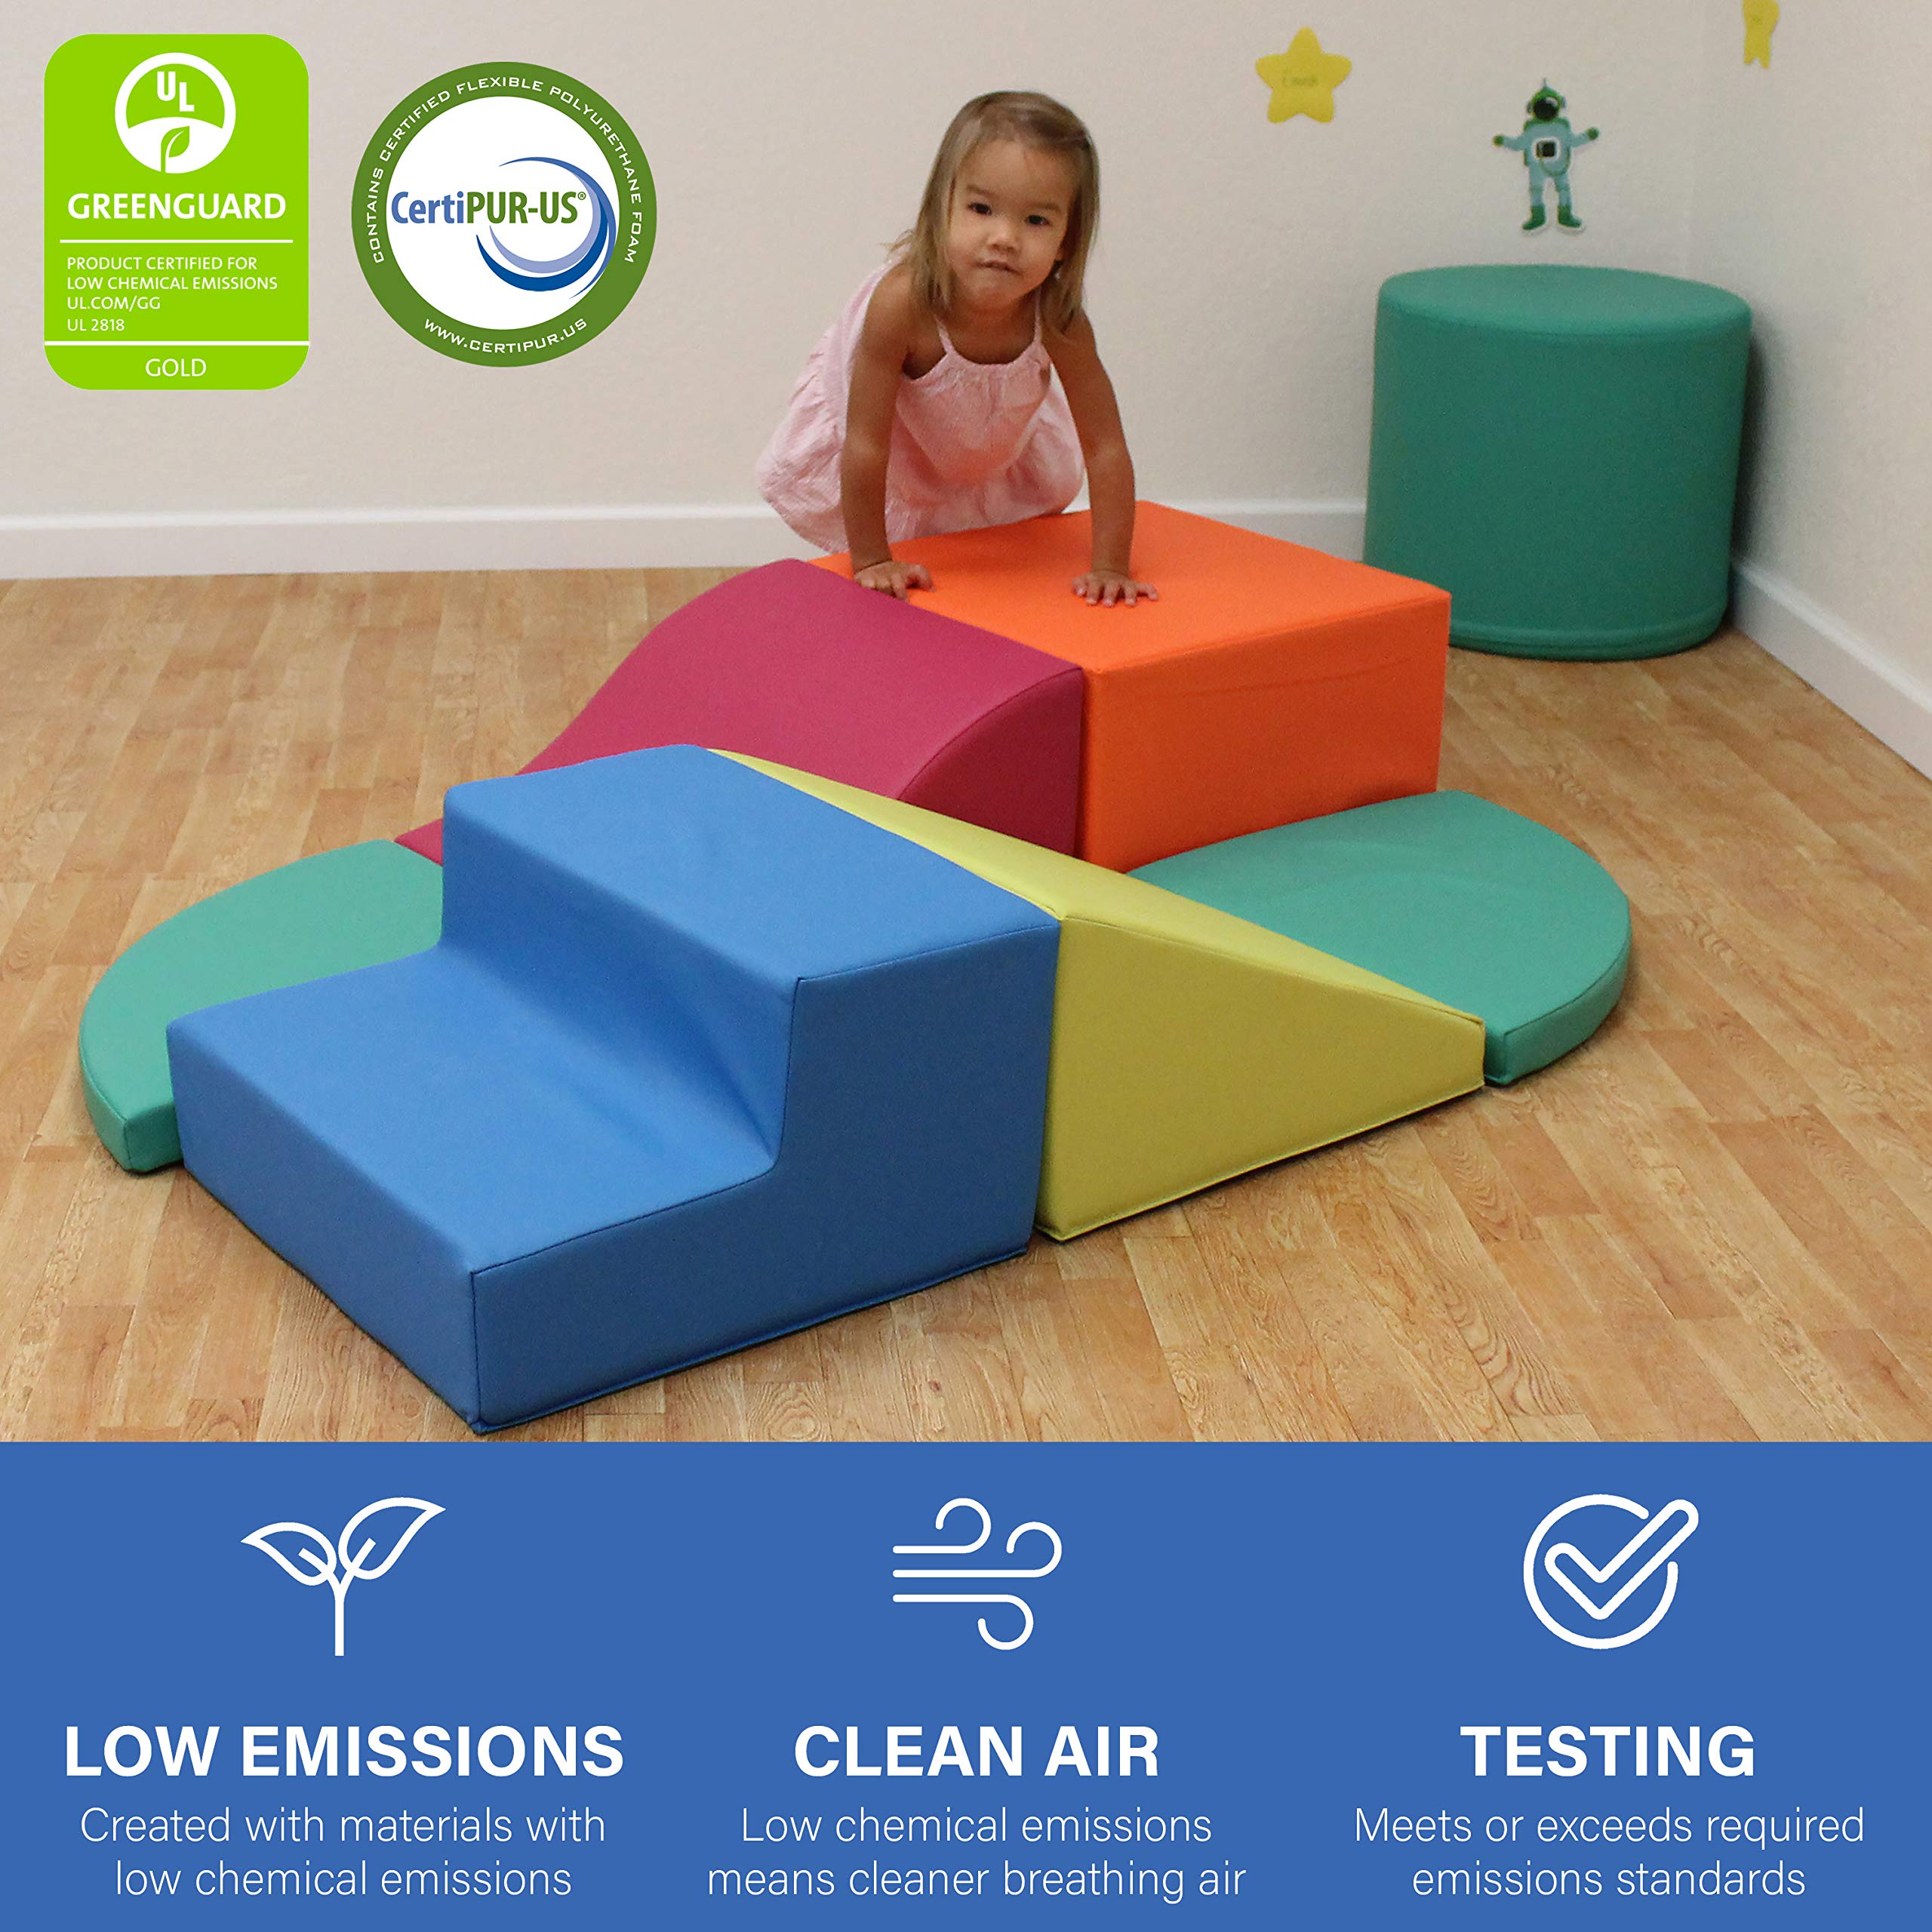 Factory Direct Partners 13021-LMRS SoftScape Playtime All Around Climber for Crawling Infants and Toddlers, Soft Foam Indoor Active Play with Steps and Slides (6-Piece) - Lime/Raspberry